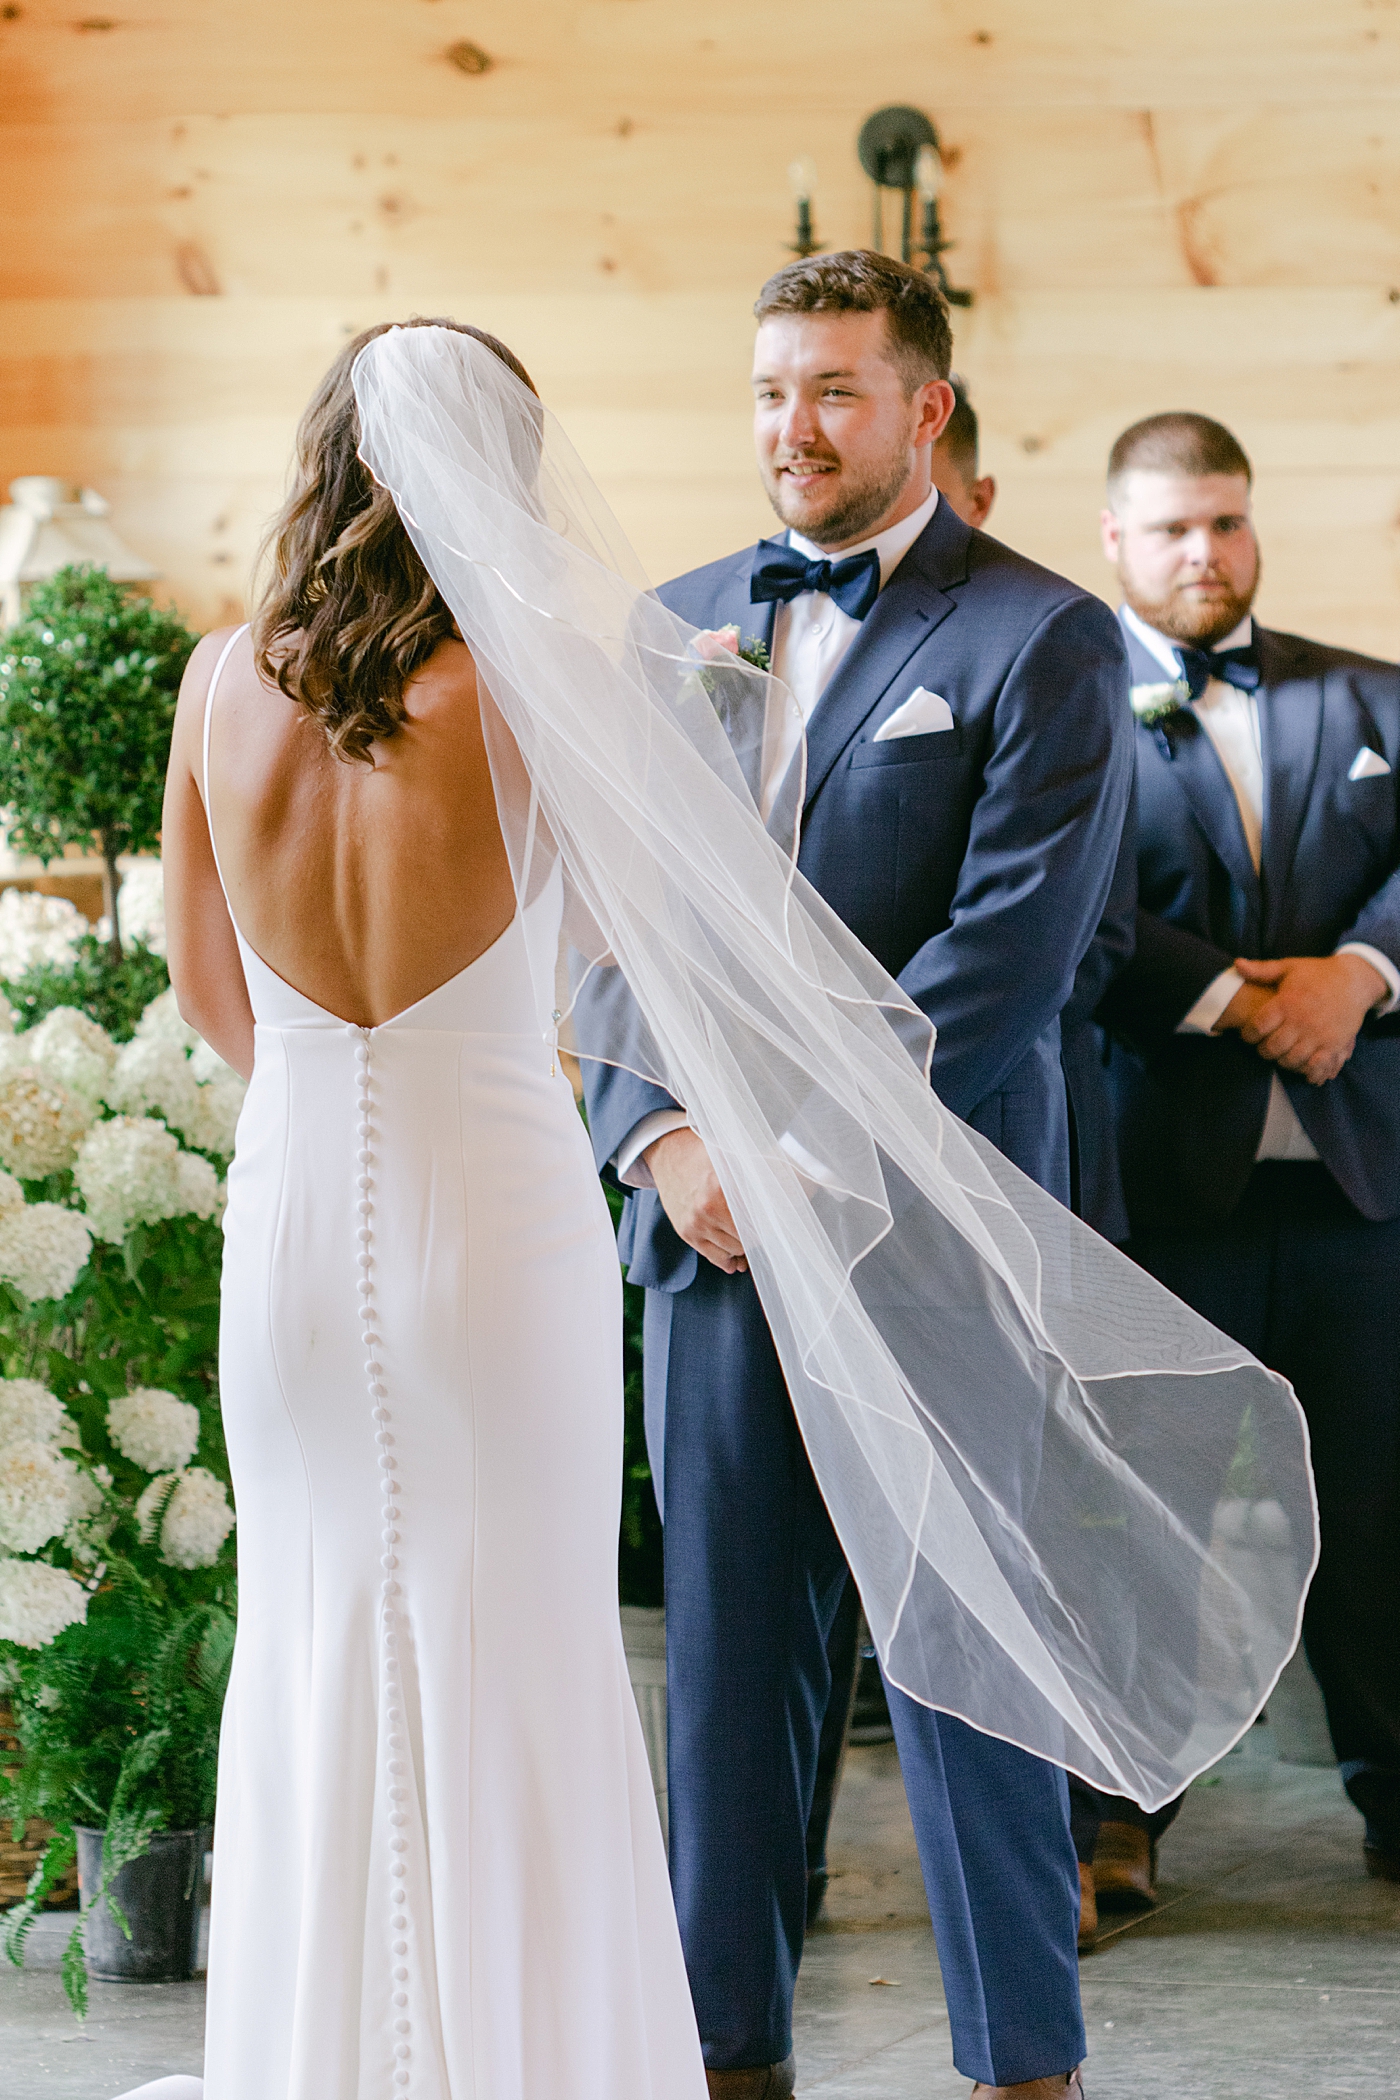 Bride and groom exchanging vows | Image by Hope Helmuth Photography